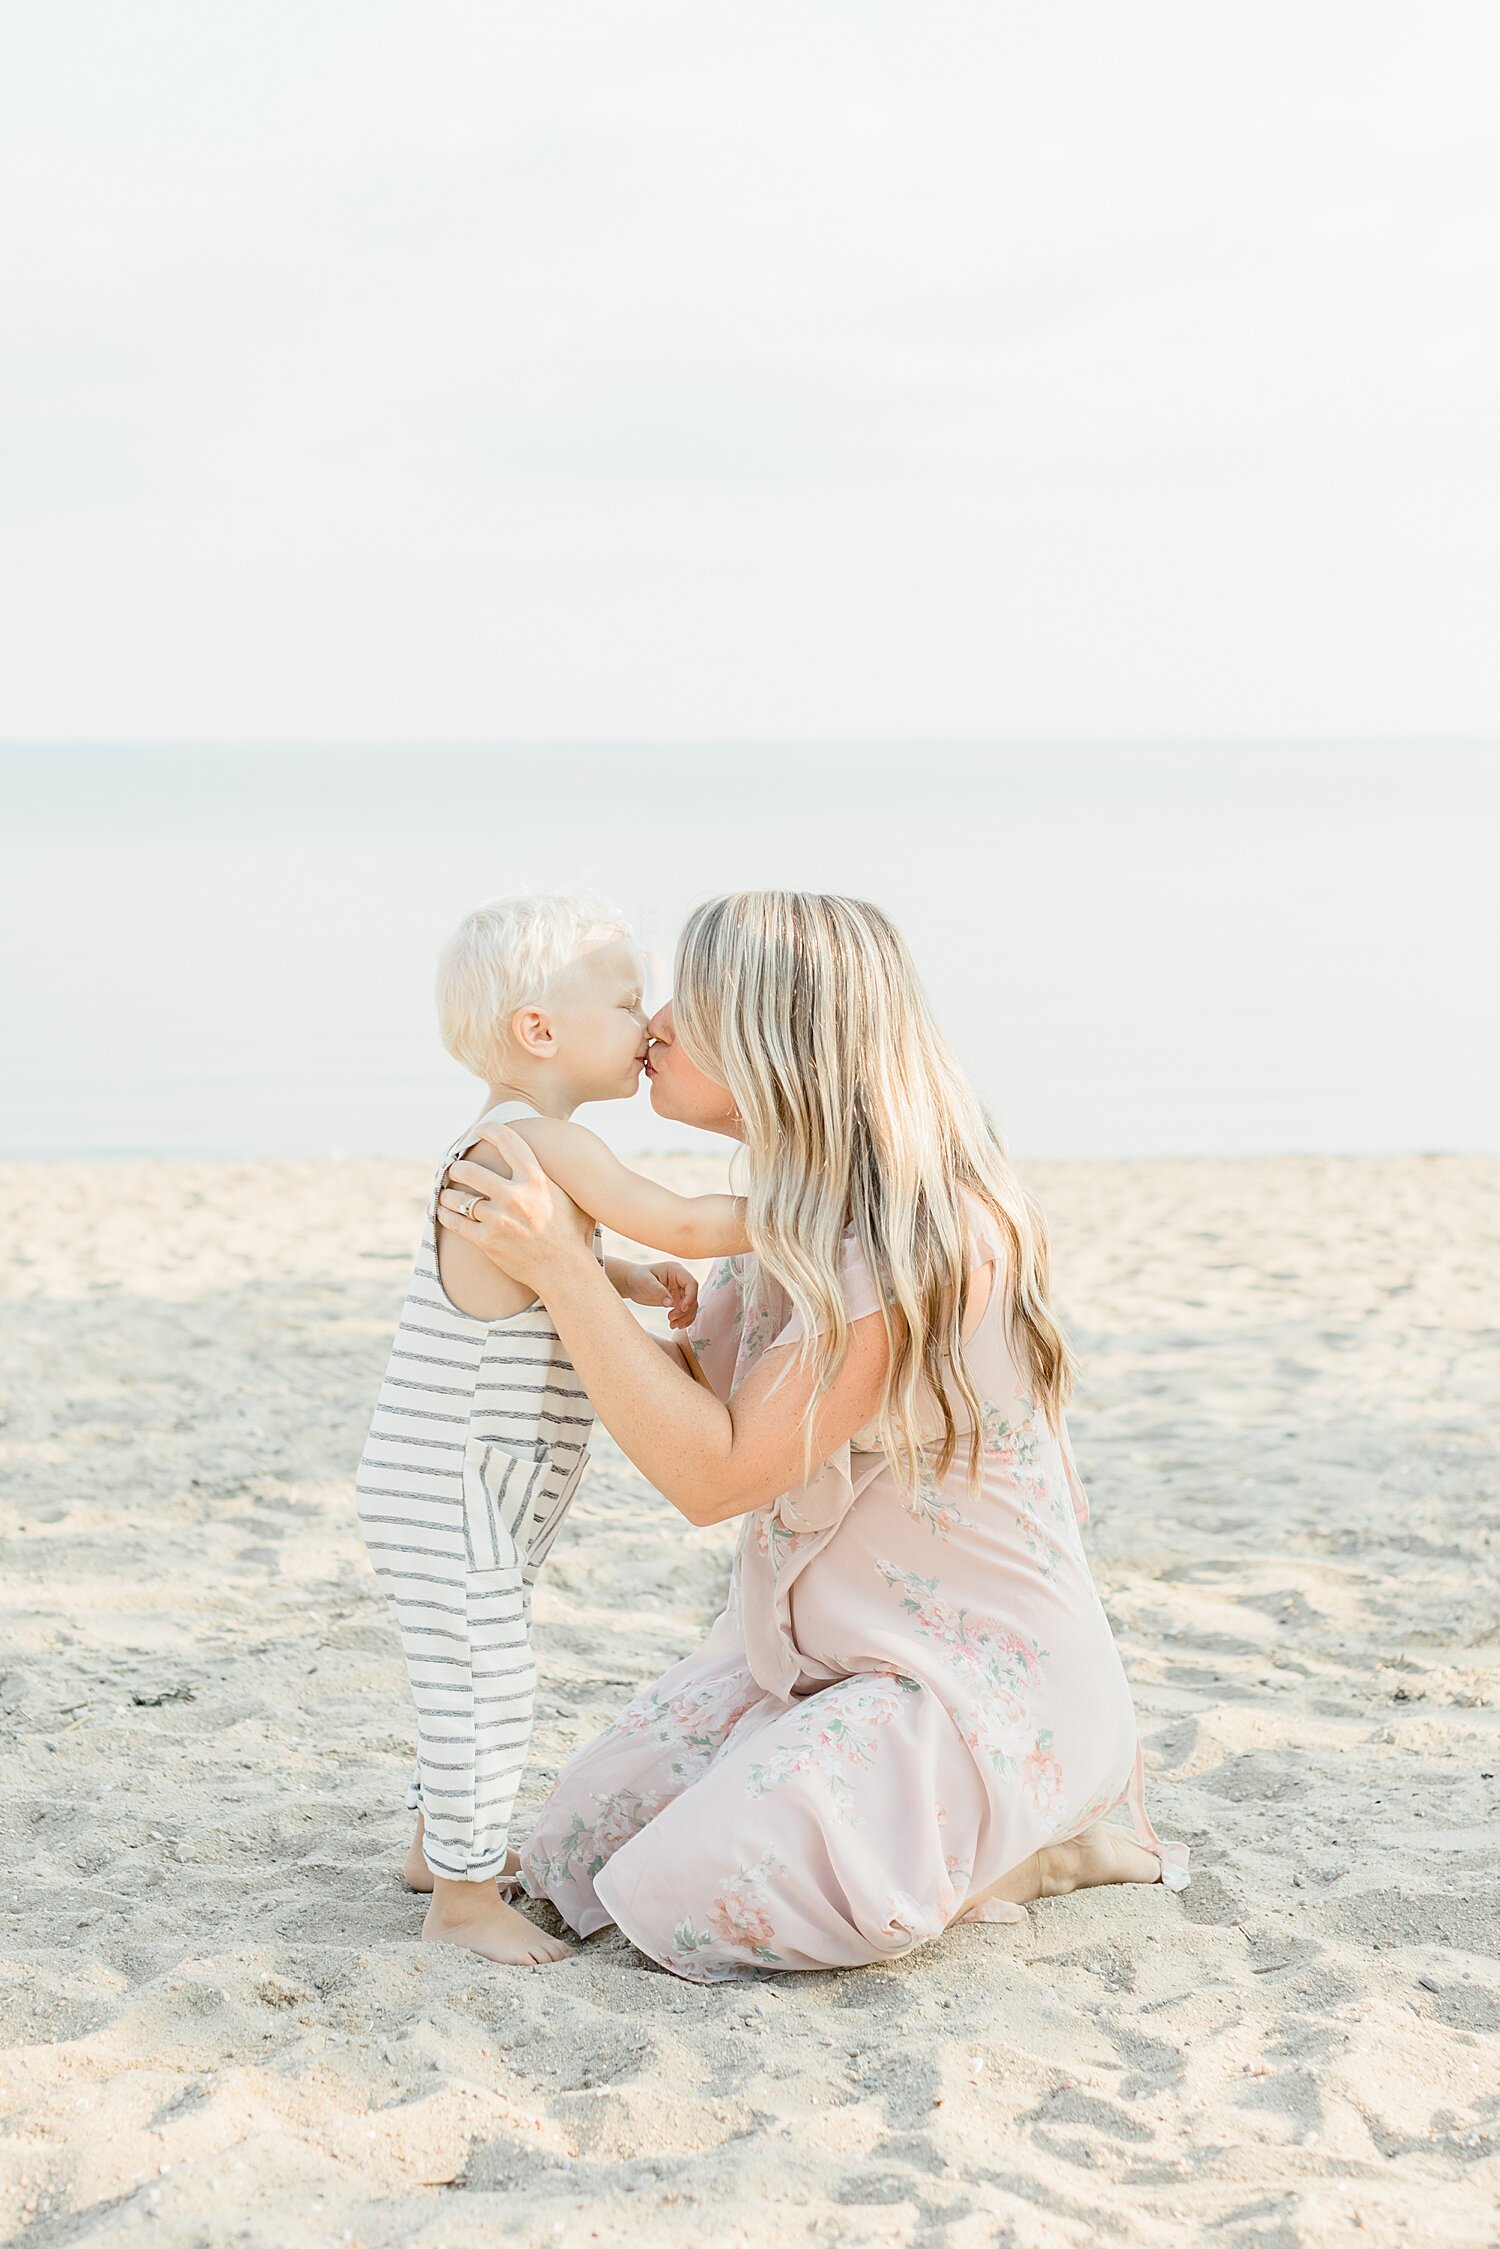 Weed Beach Maternity Session | Darien, CT Maternity Photographer | Kristin Wood Photography